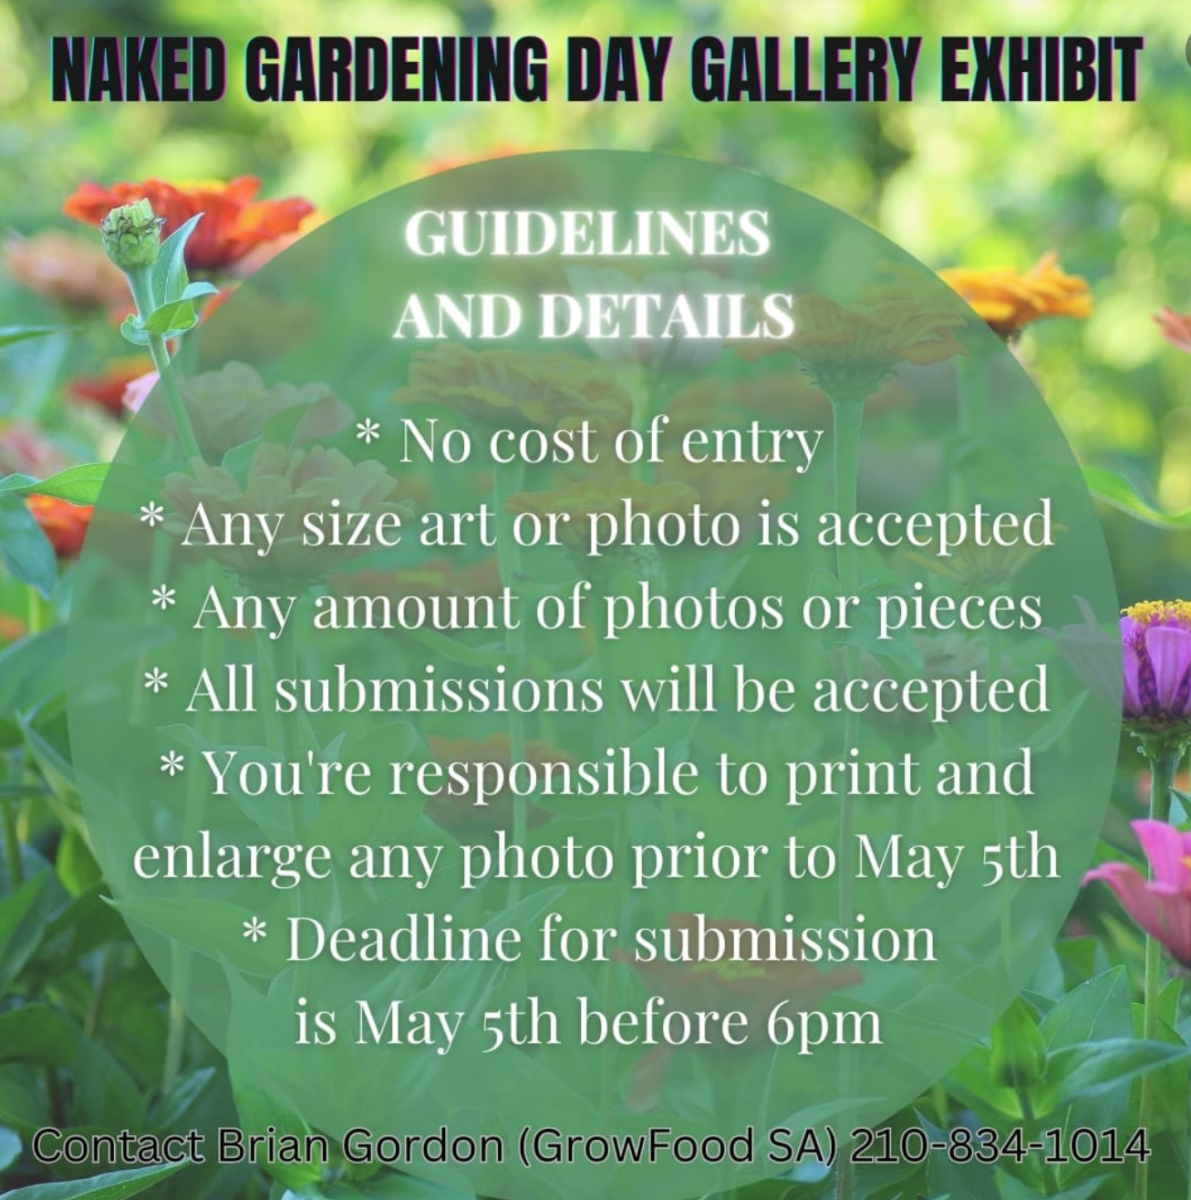 Naked Gardening Day Gallery Exhibit:. All bodies welcome and all submissions accepted.